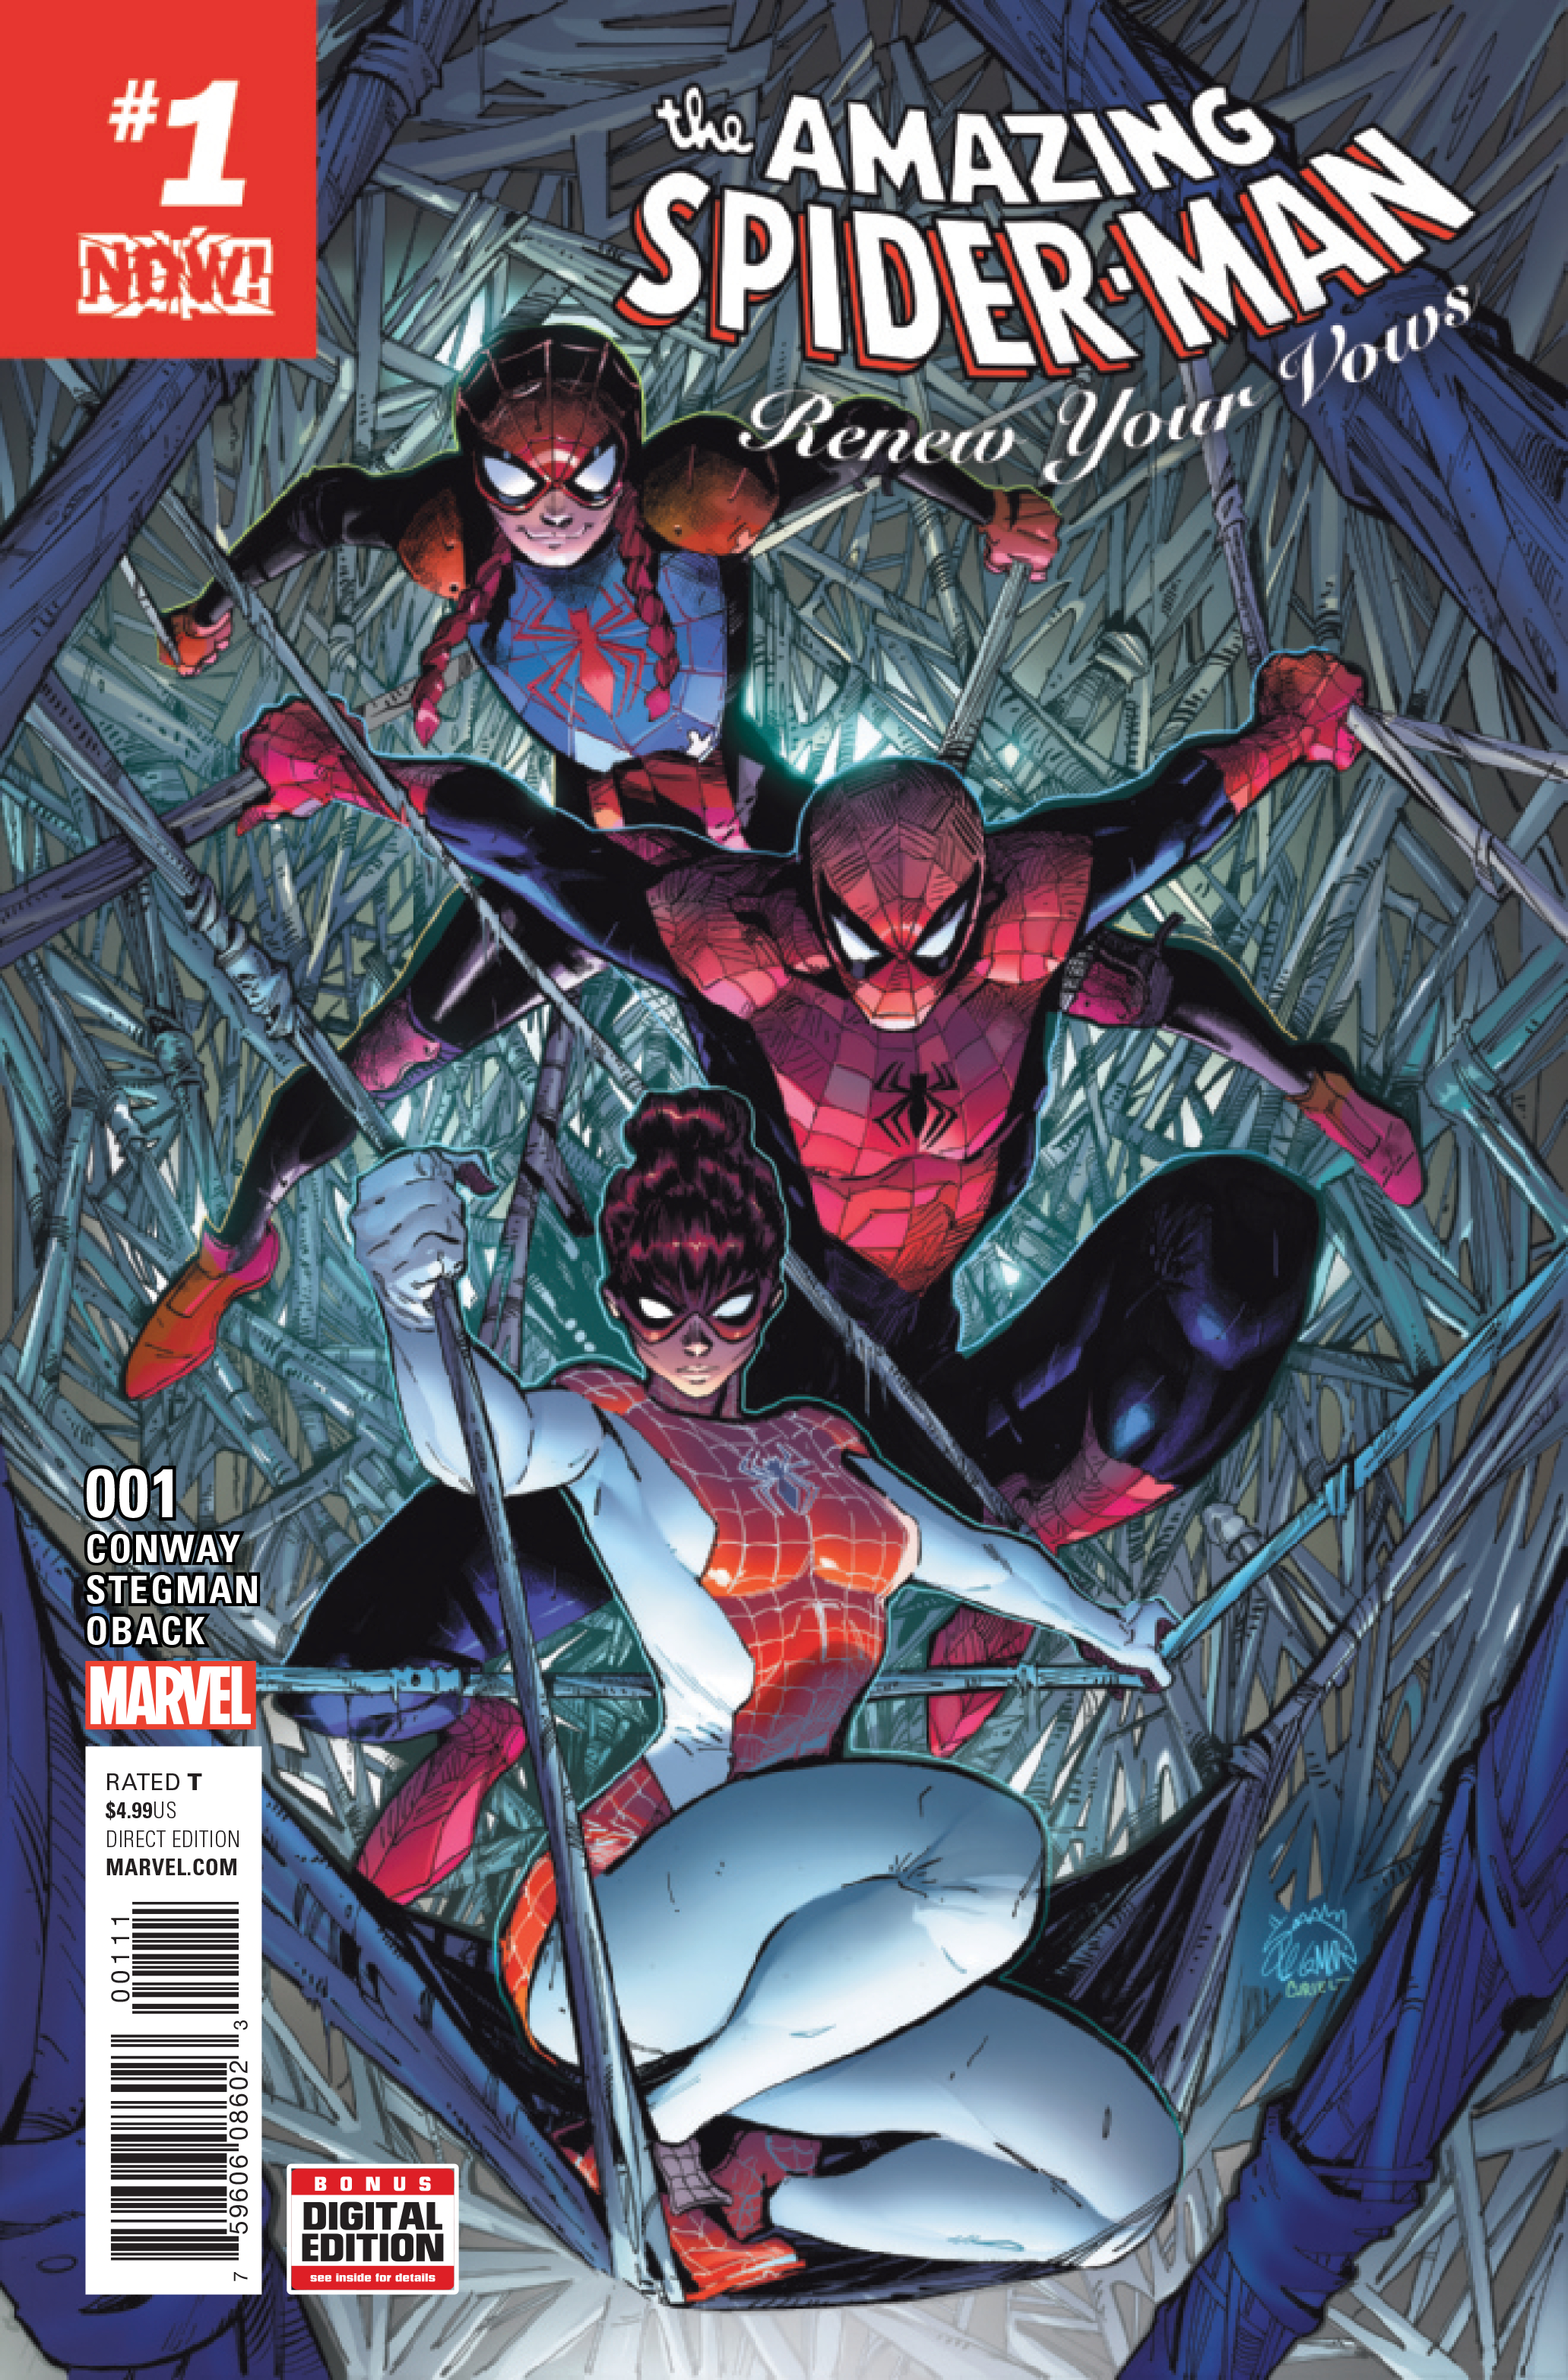 AMAZING SPIDER-MAN RENEW YOUR VOWS #1 NOW